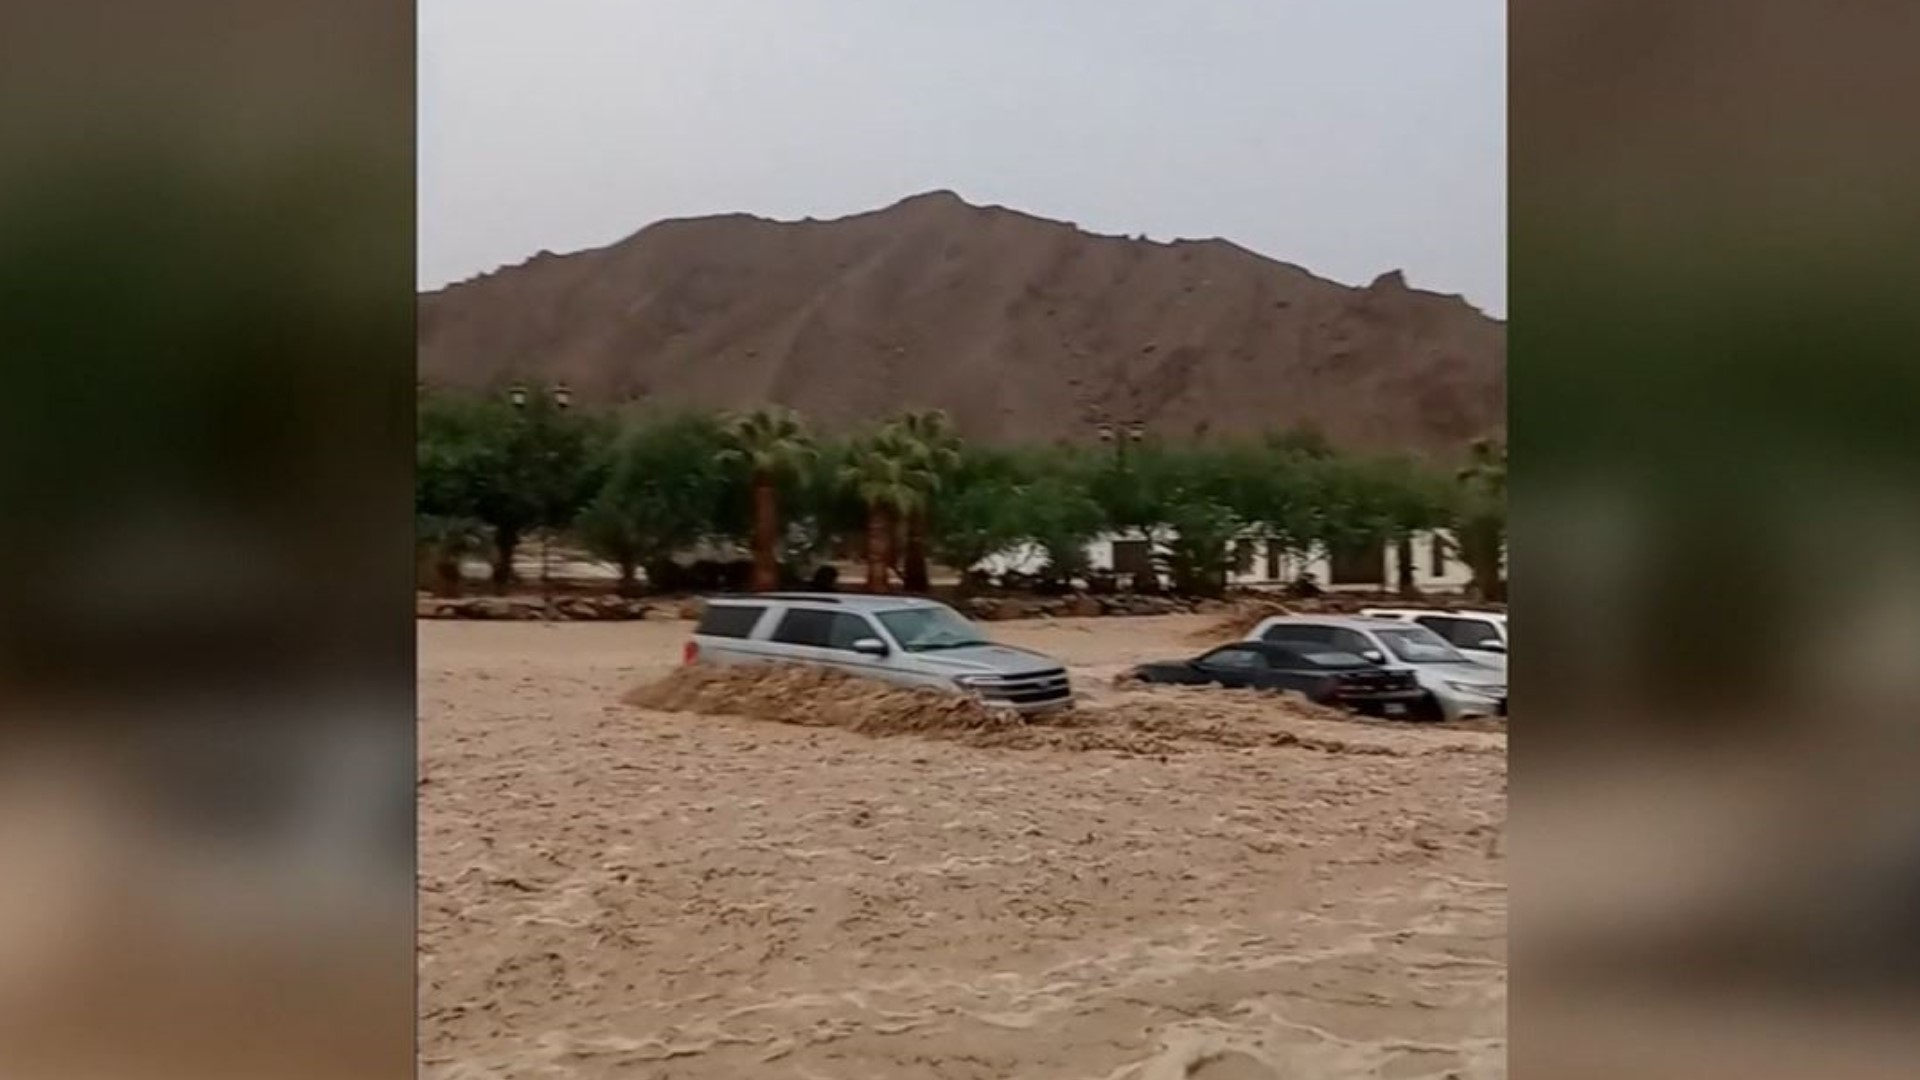 Flooding overtook several cars in California's Death Valley amid record floods that have stranded more than 1,000 people.